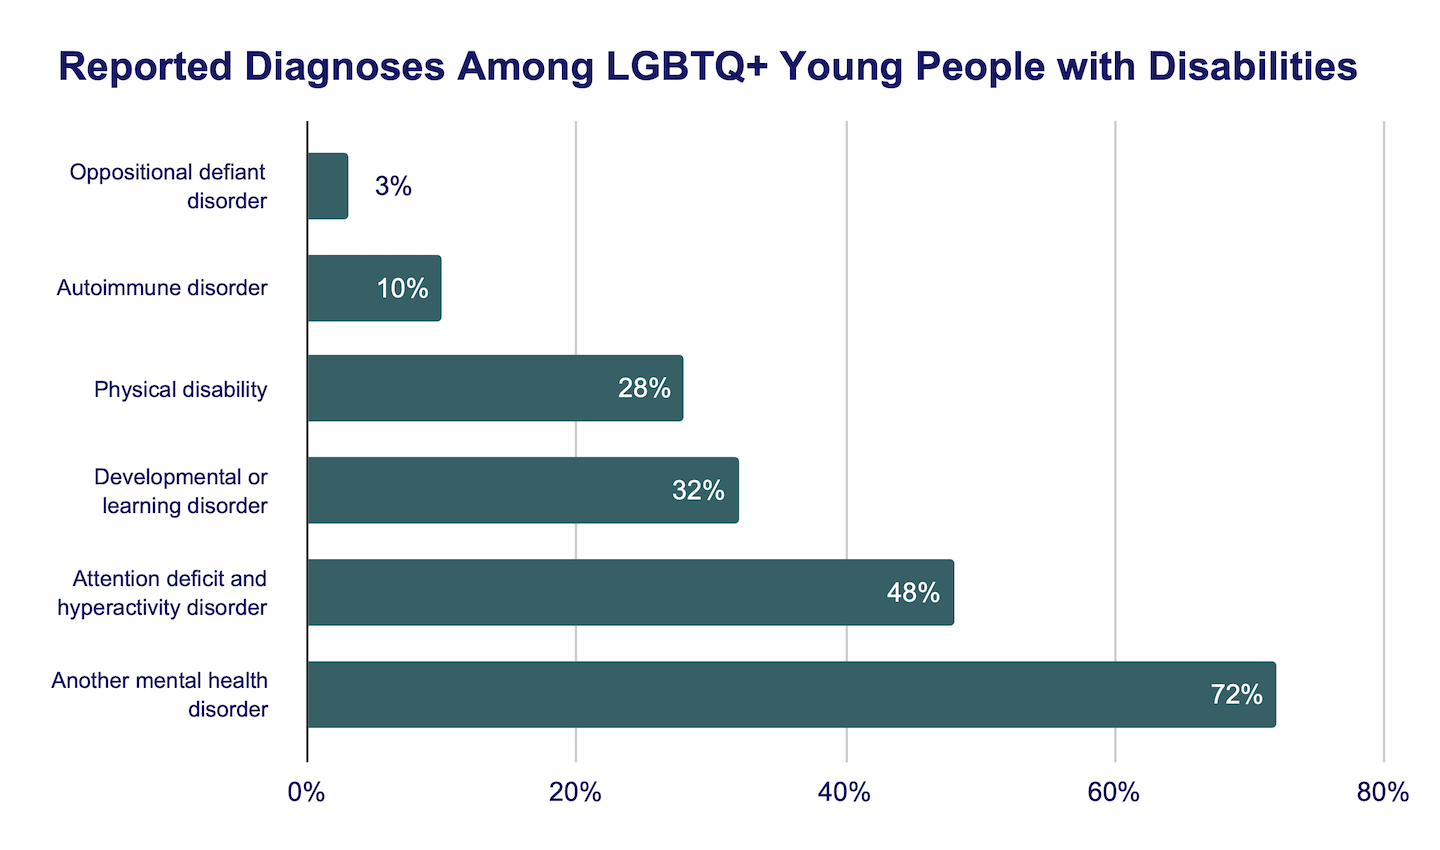 Reported Diagnoses among LGBTQ+ Young People With Disabilities